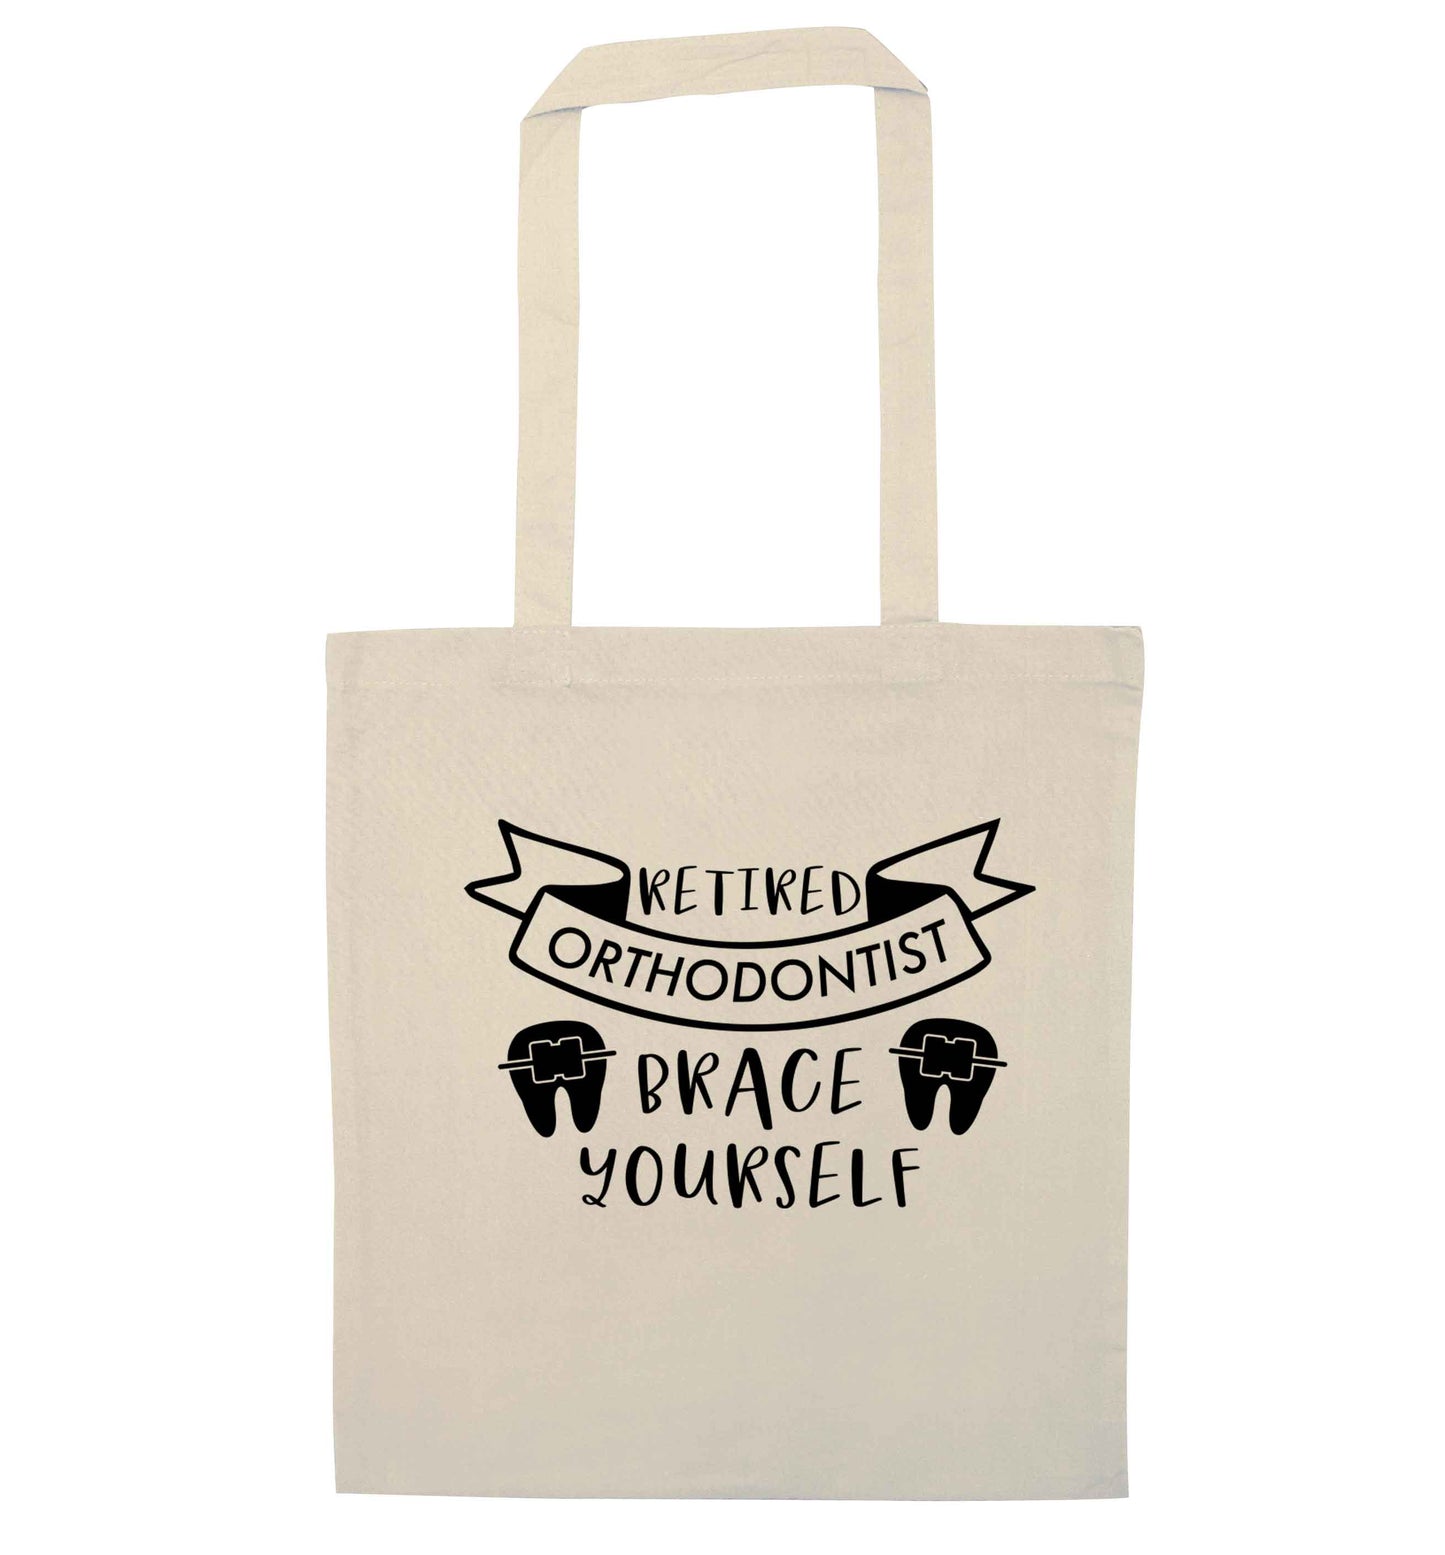 Retired orthodontist brace yourself natural tote bag